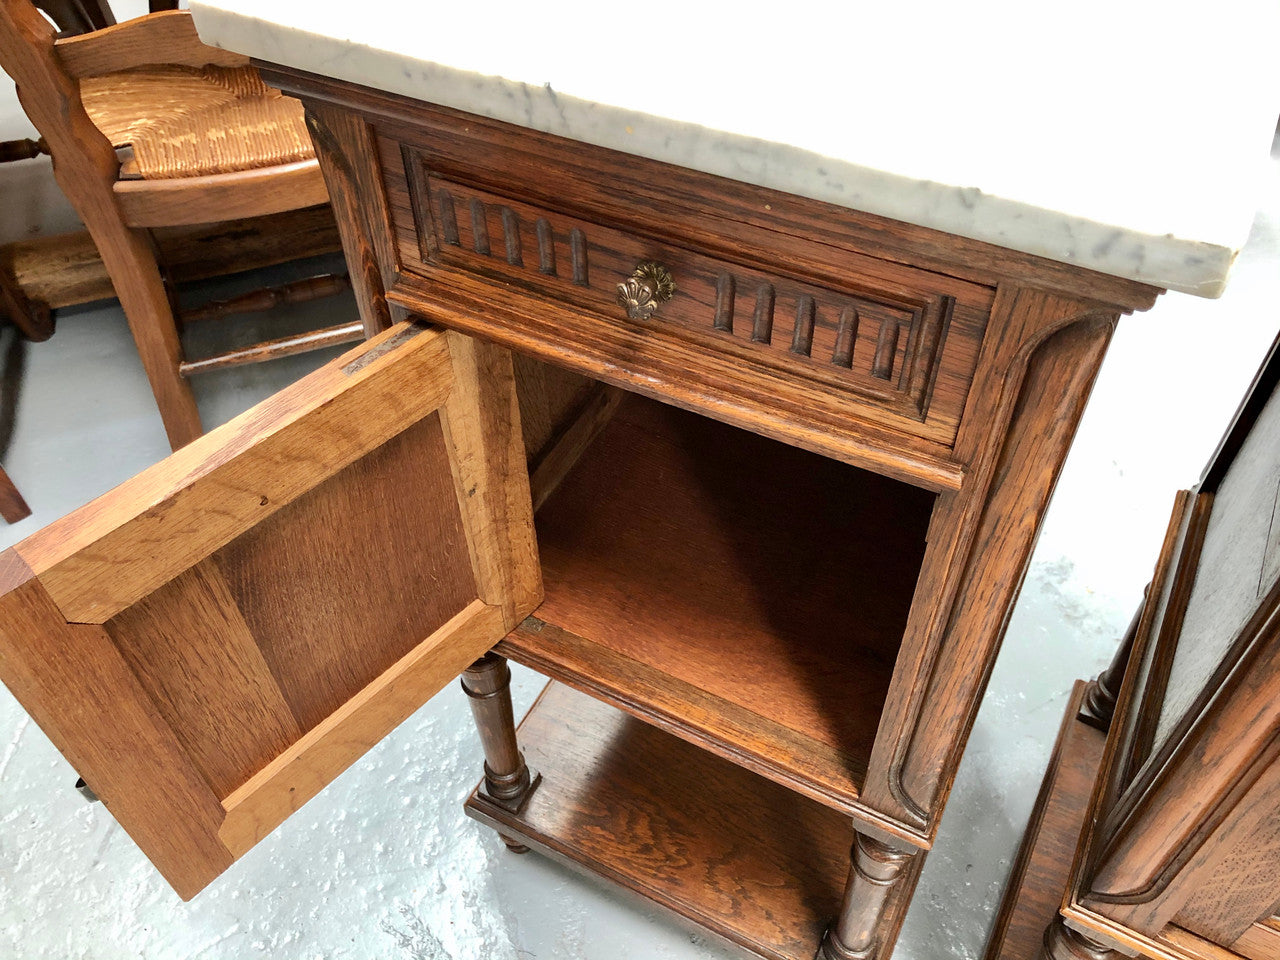 A french oak pair of carved bedside cabinets, with lovely detail and nice coloured marble tops and plenty of storage space. In good condition.